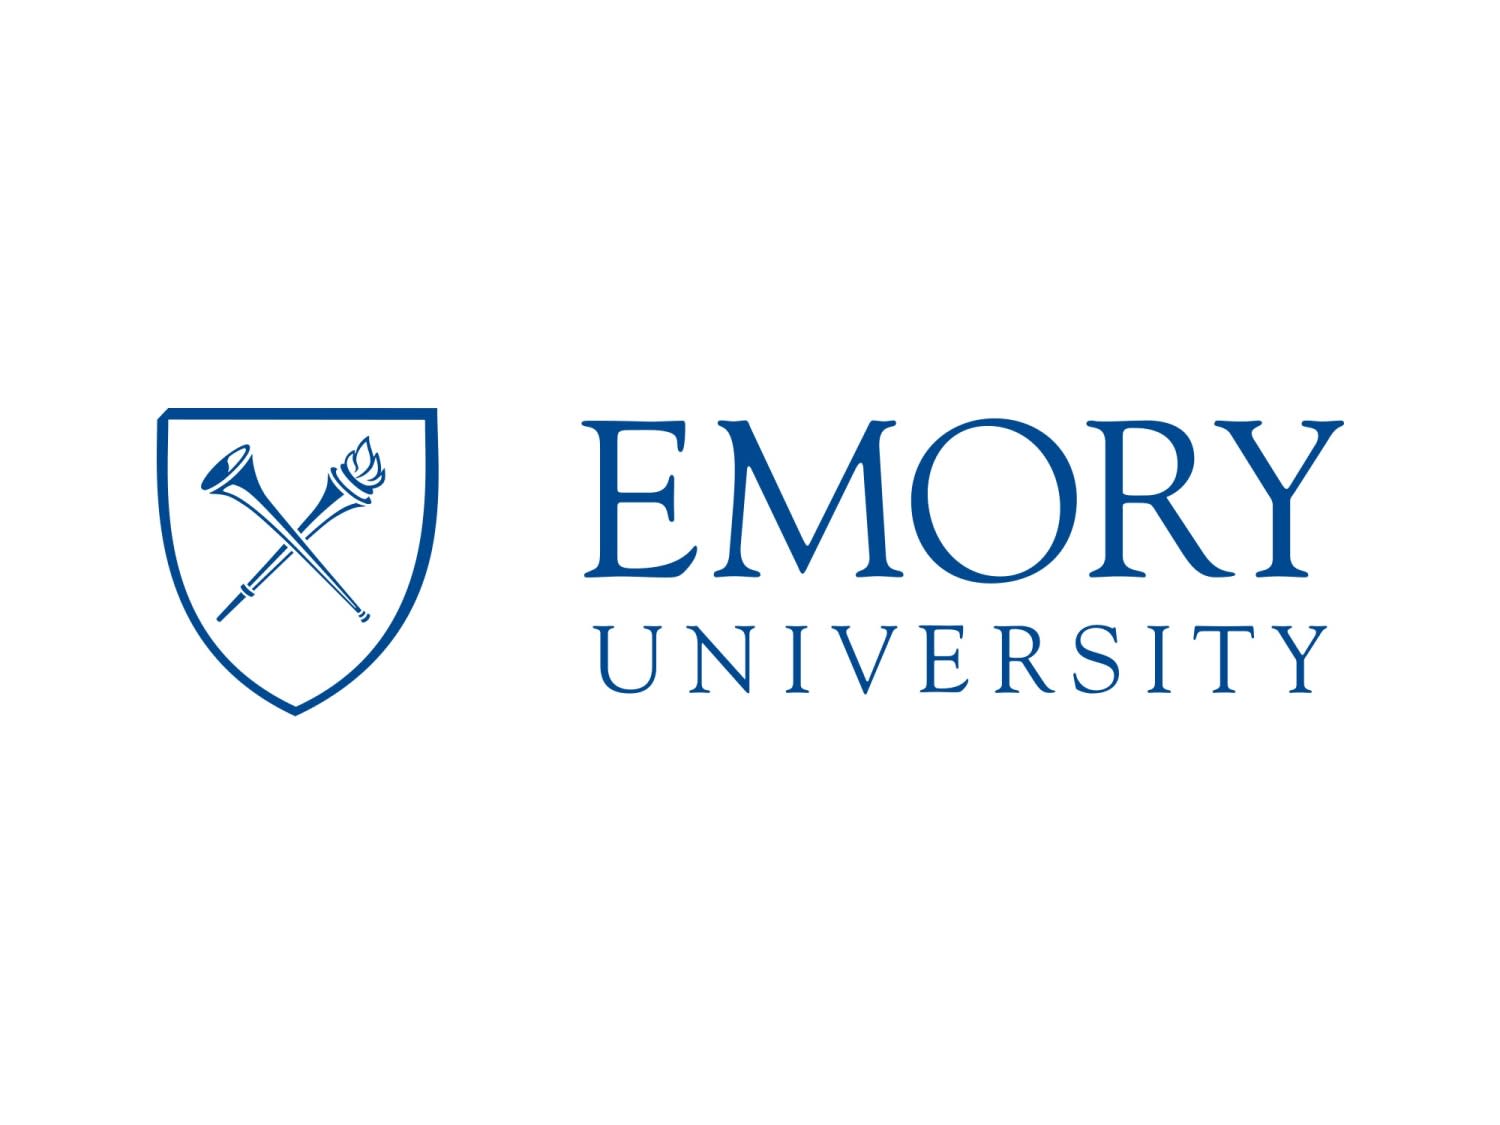 Emory professor hit with criminal charge, linked to Chinese